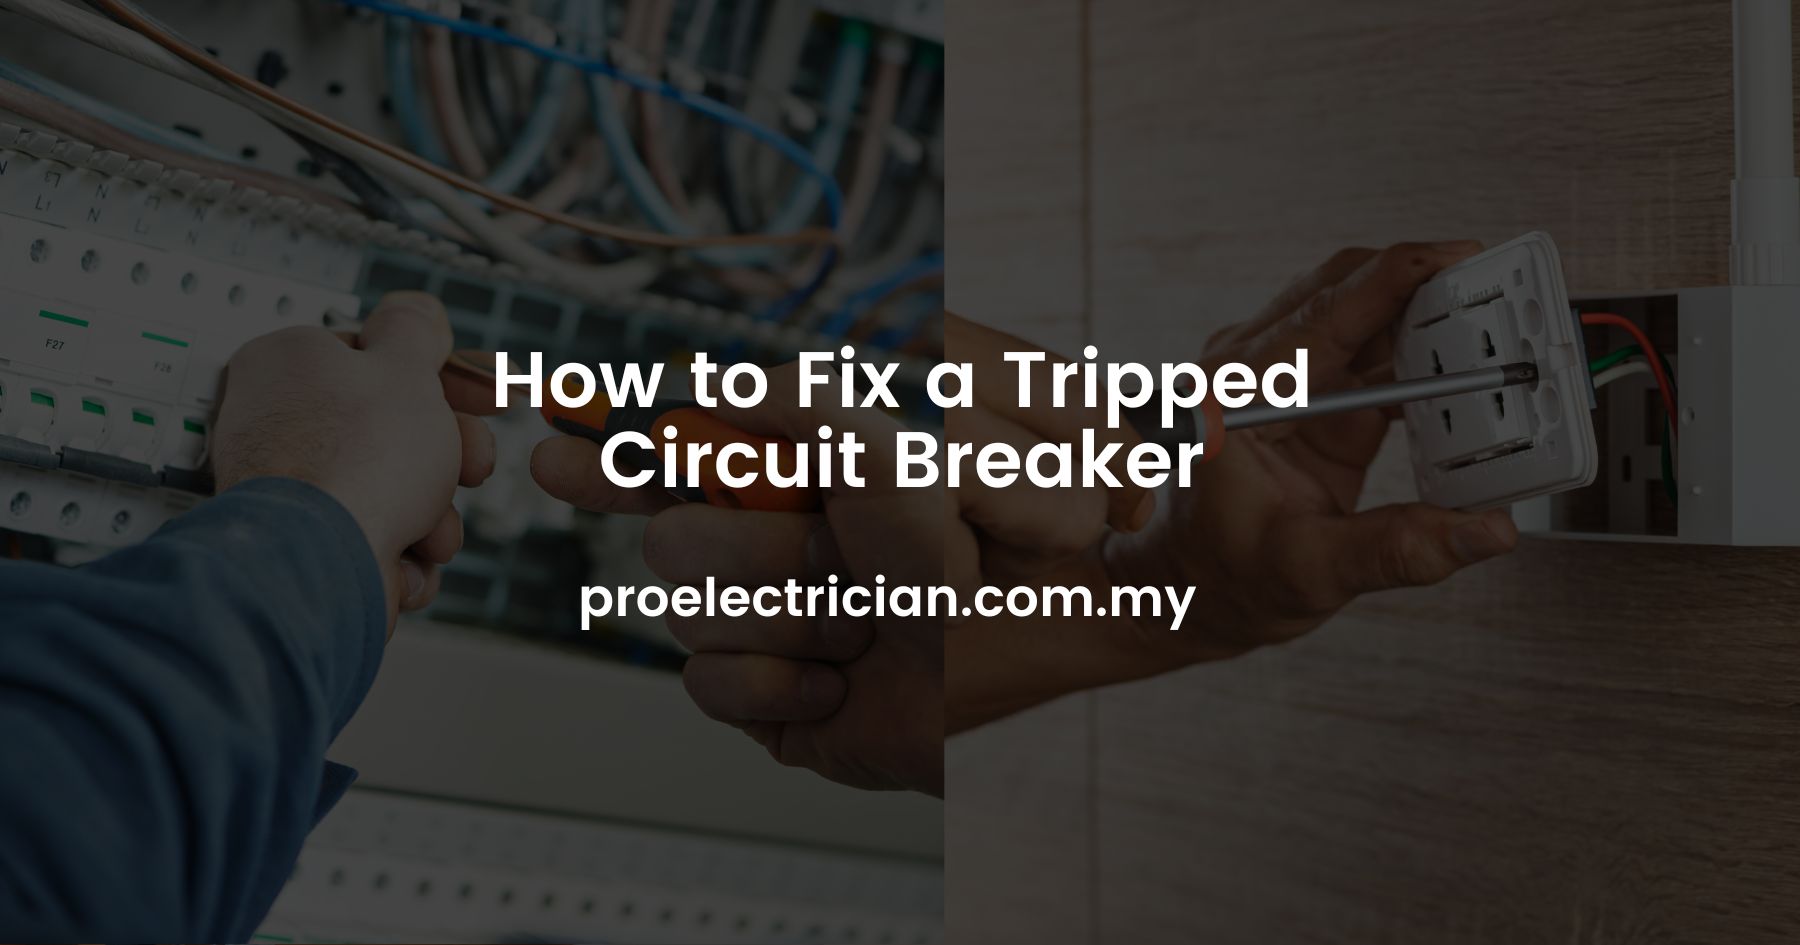 How to Fix a Tripped Circuit Breaker